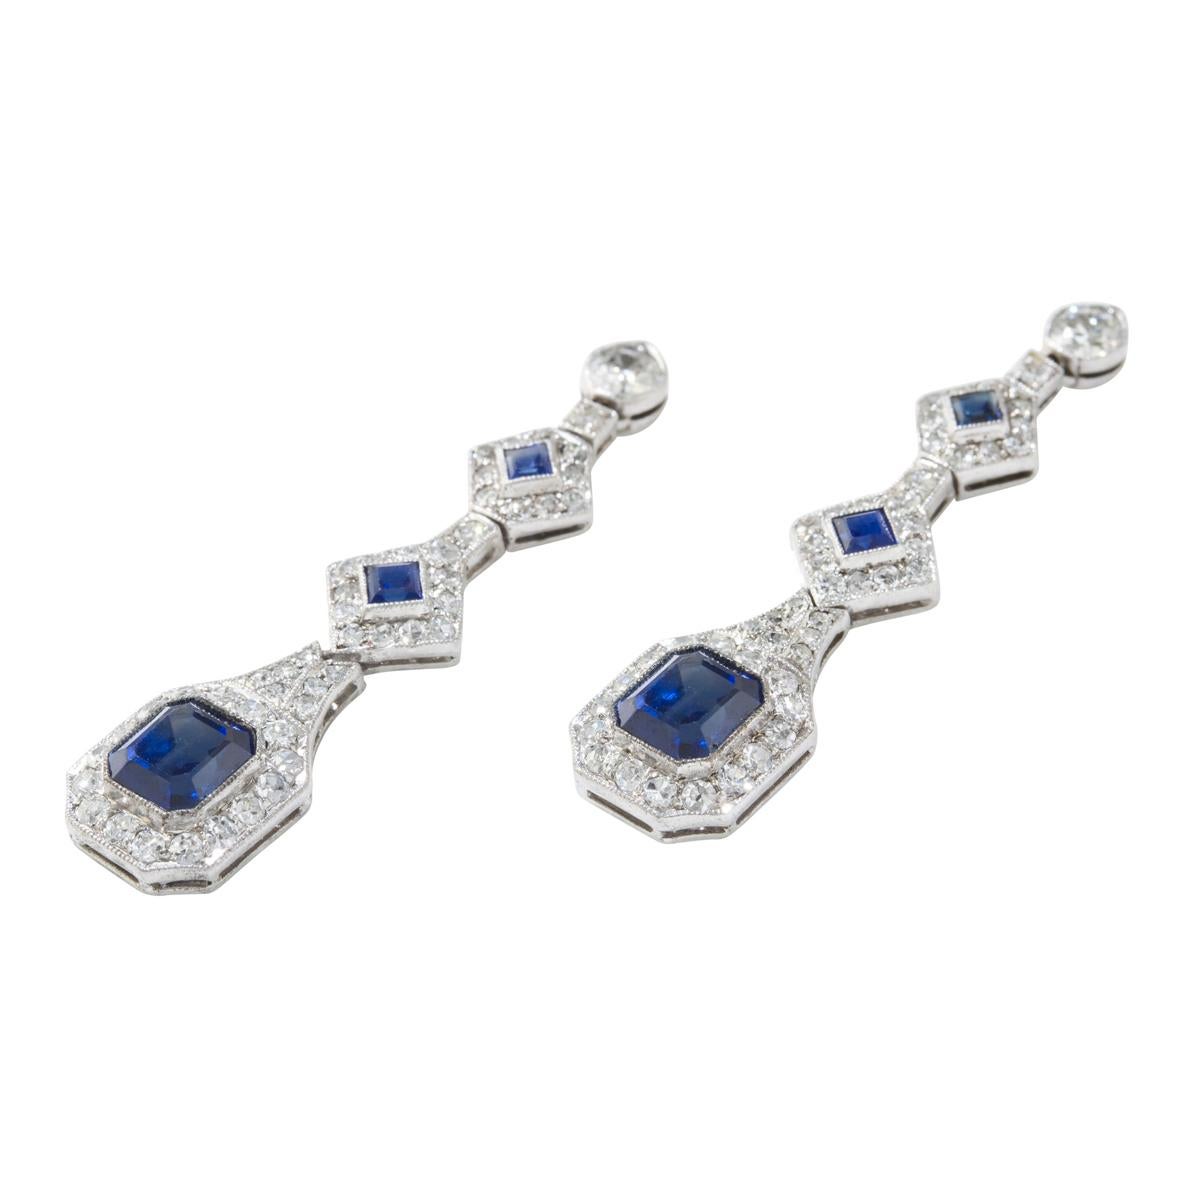 A pair of sapphire and diamond drop earrings, each earring comprising of an emerald-cut sapphire, estimated to weigh a total of 2.5 carats, to the centre of an eight-cut diamond cluster surmounted by two further step-cut sapphires and diamond